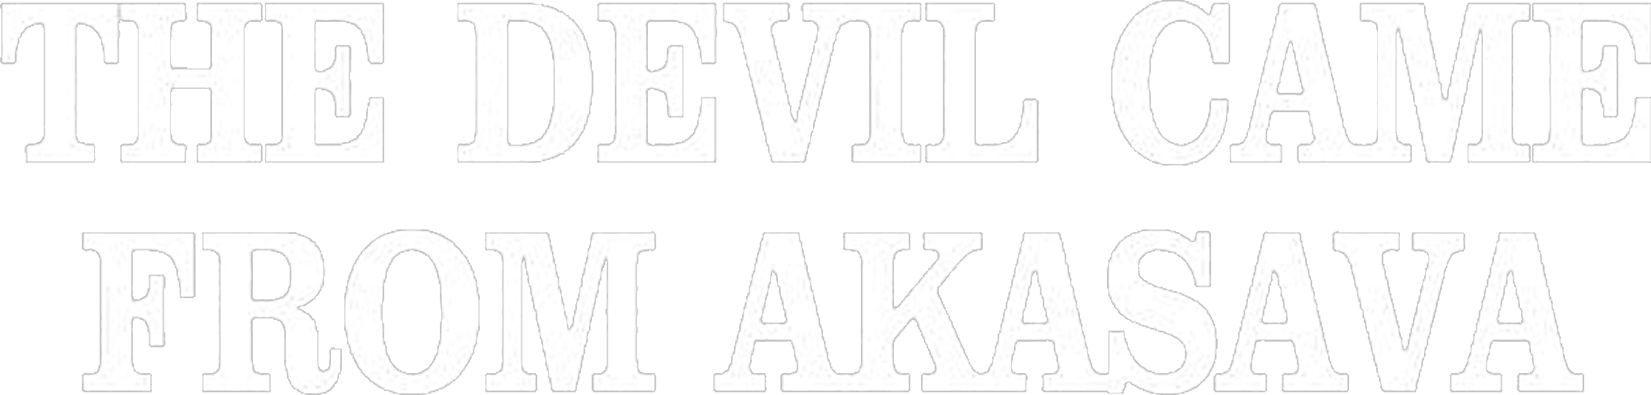 The Devil Came from Akasava logo